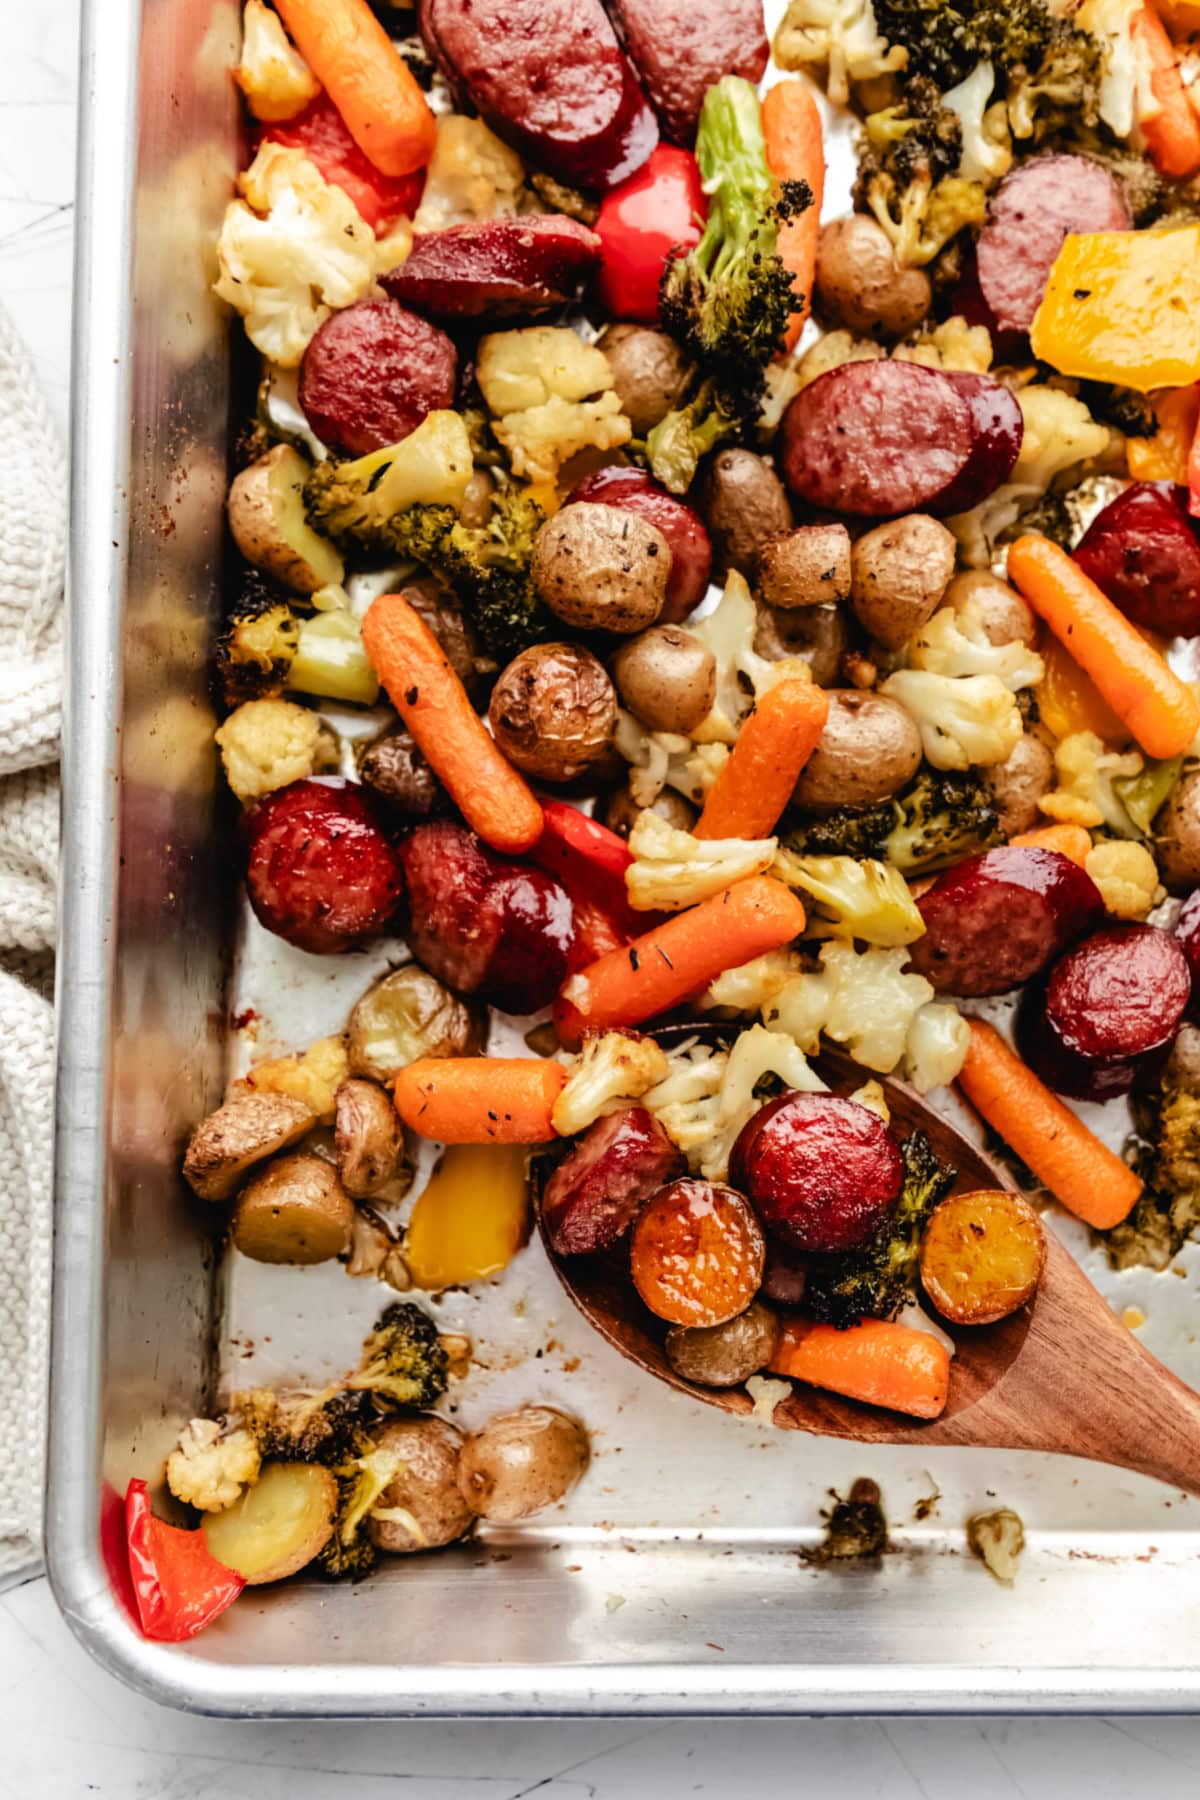 A wooden spoon full of sausage and veggies on a sheet pan.